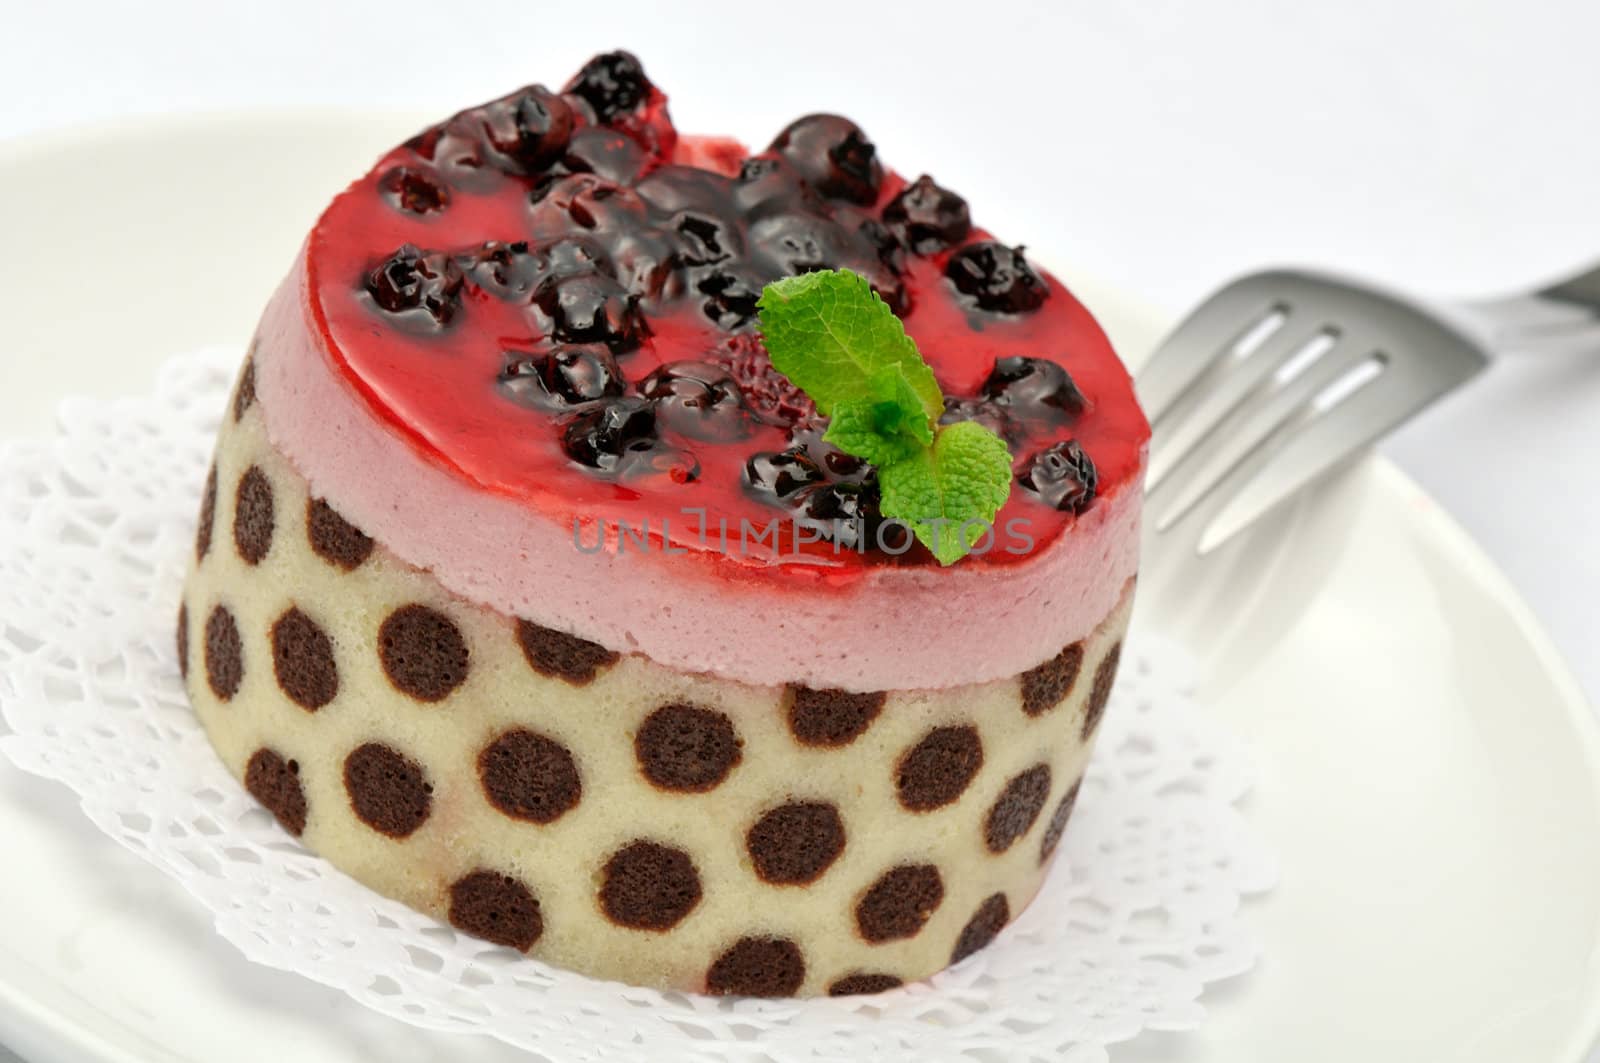 Fanciful mousse cake by Hbak